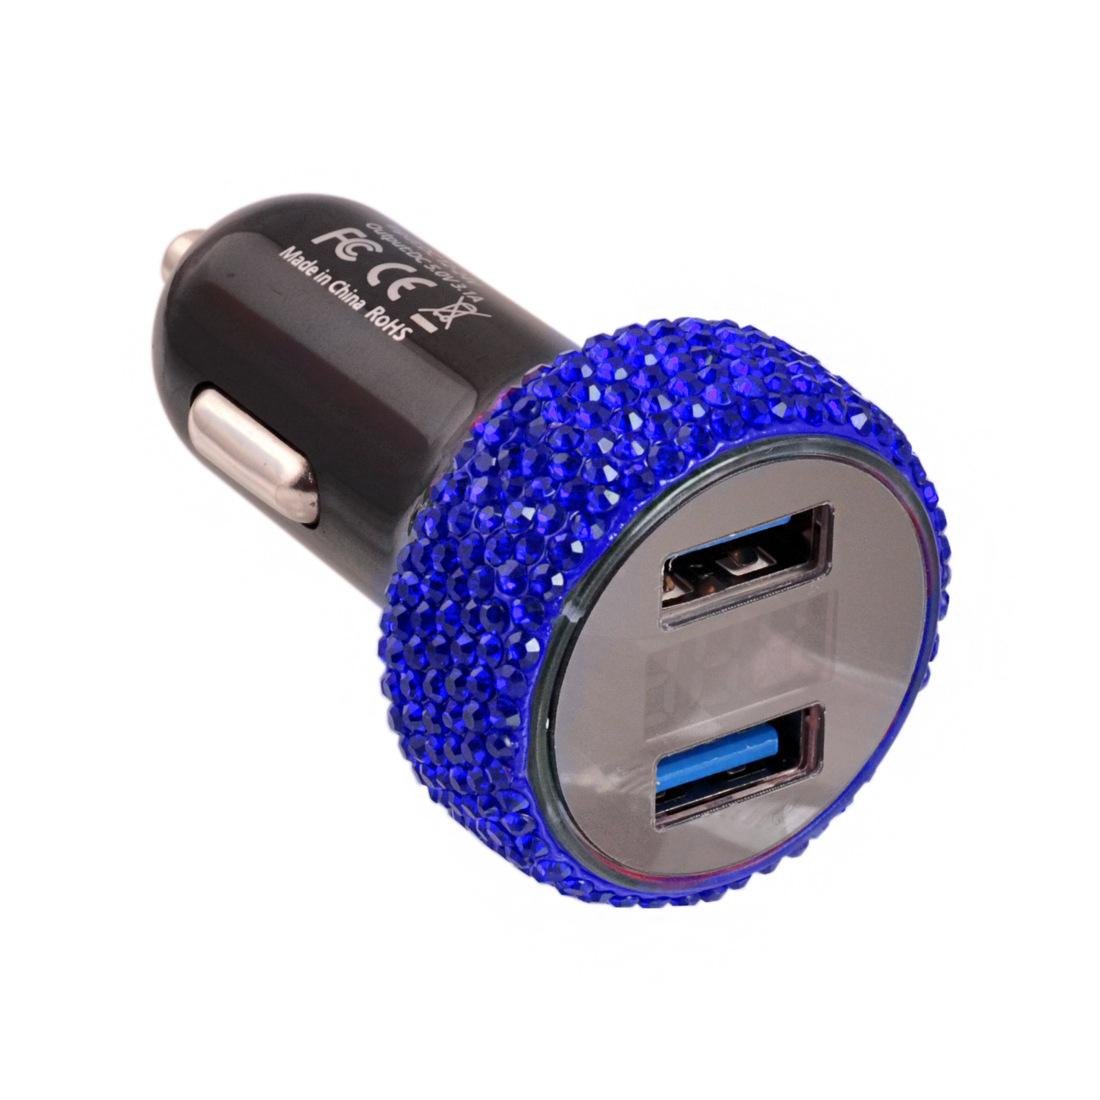 Voltage Display Bling Dual USB Car Quick Charge 3.0 Crystal Cigarette Adapter 3